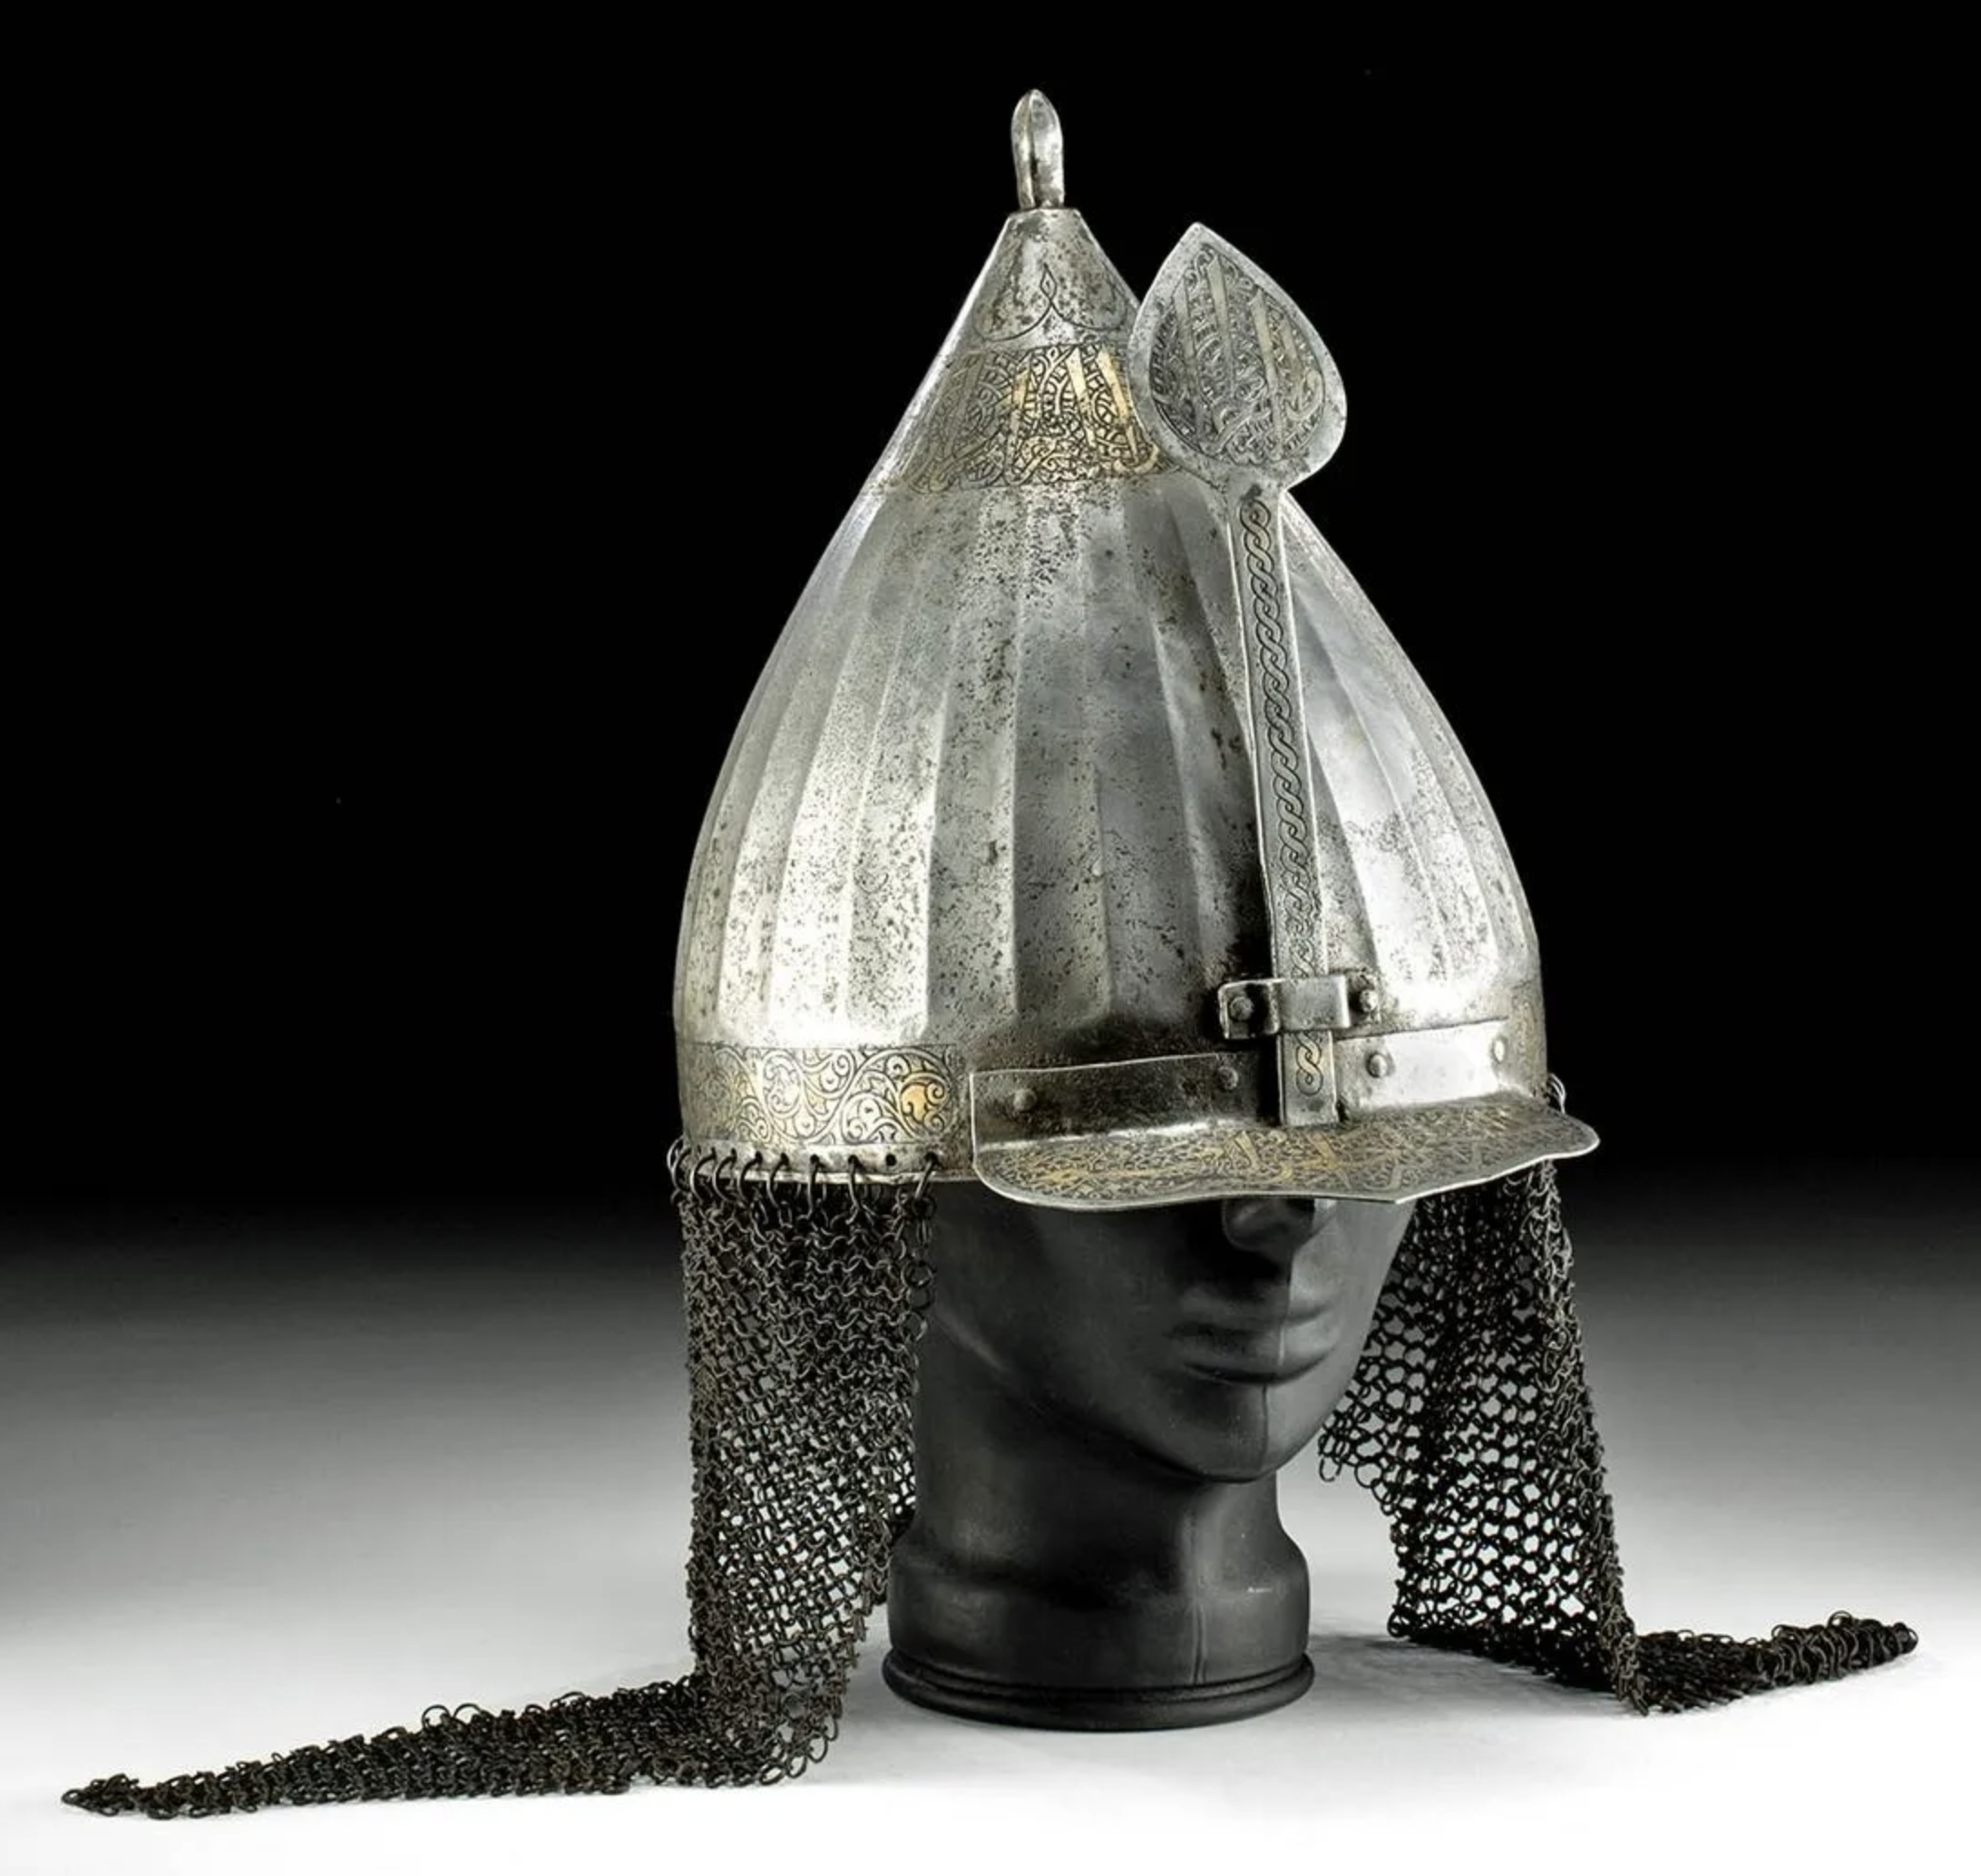 16th- to 17th-century CE Ottoman Empire (Turkey to Iran) gilded iron turban or chickhak helmet of classic pointed form with spiked finial, chainmail aventails suspended from loops, and calligraphic inscriptions. Similar to an example in Walters Art Museum collection. Provenance: Coral Gables, Florida private collection. Est. $30,000-$45,000. Courtesy of Artemis Gallery